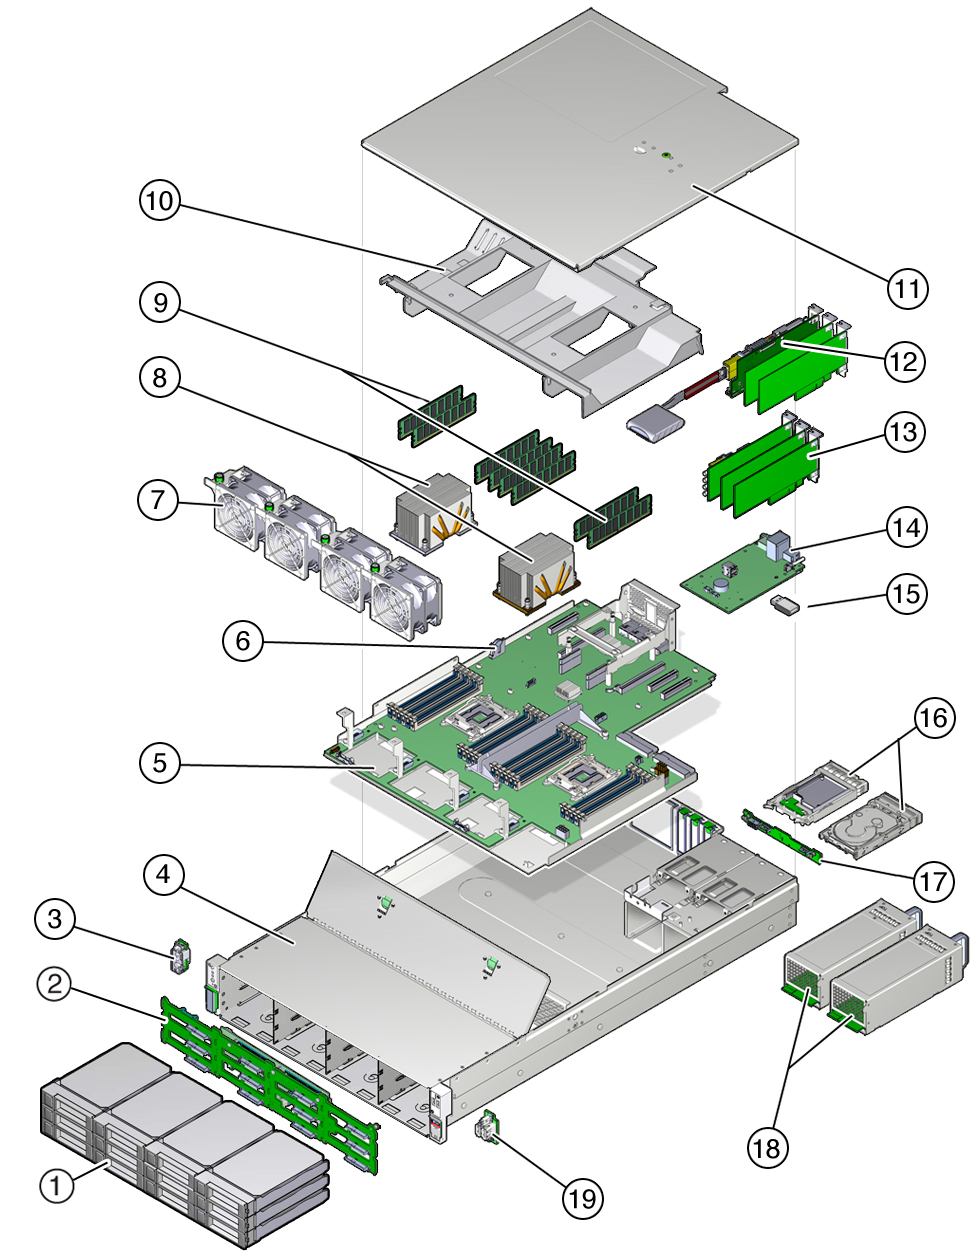 image:Figure showing exploded view of the system components.